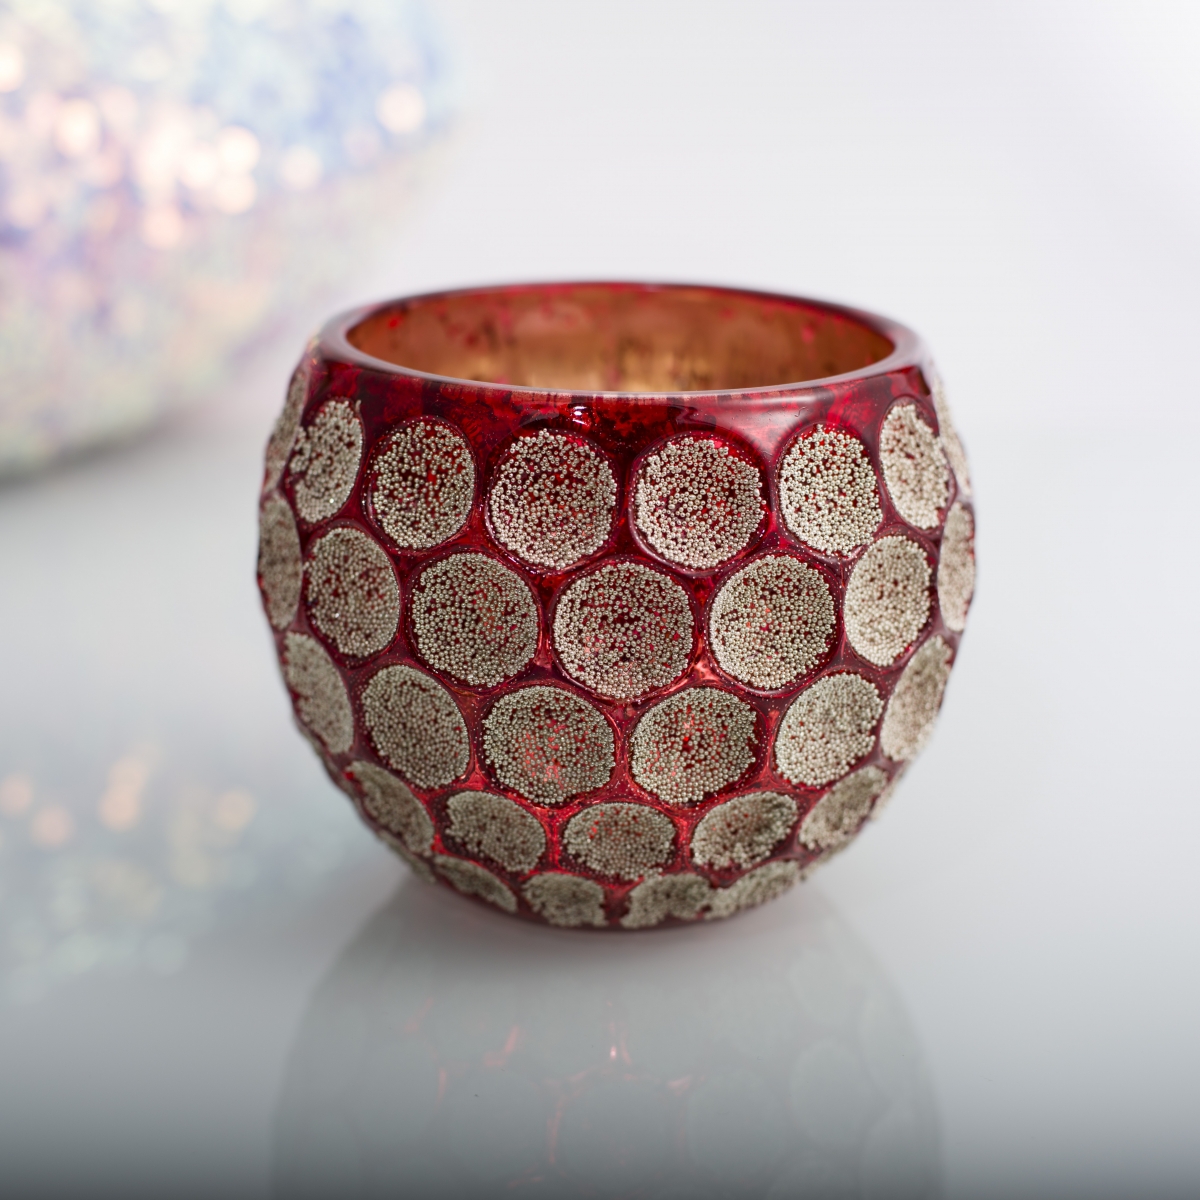 Candle Holder ：Christmas Red , Ball Shape Glass , Geometric Dots , Honeycomb Emboss , Gold Beads ,China Factory , Good Price-HOWCANDLE-Candles,Scented Candles,Aromatherapy Candles,Soy Candles,Vegan Candles,Jar Candles,Pillar Candles,Candle Gift Sets,Essential Oils,Reed Diffuser,Candle Holder,